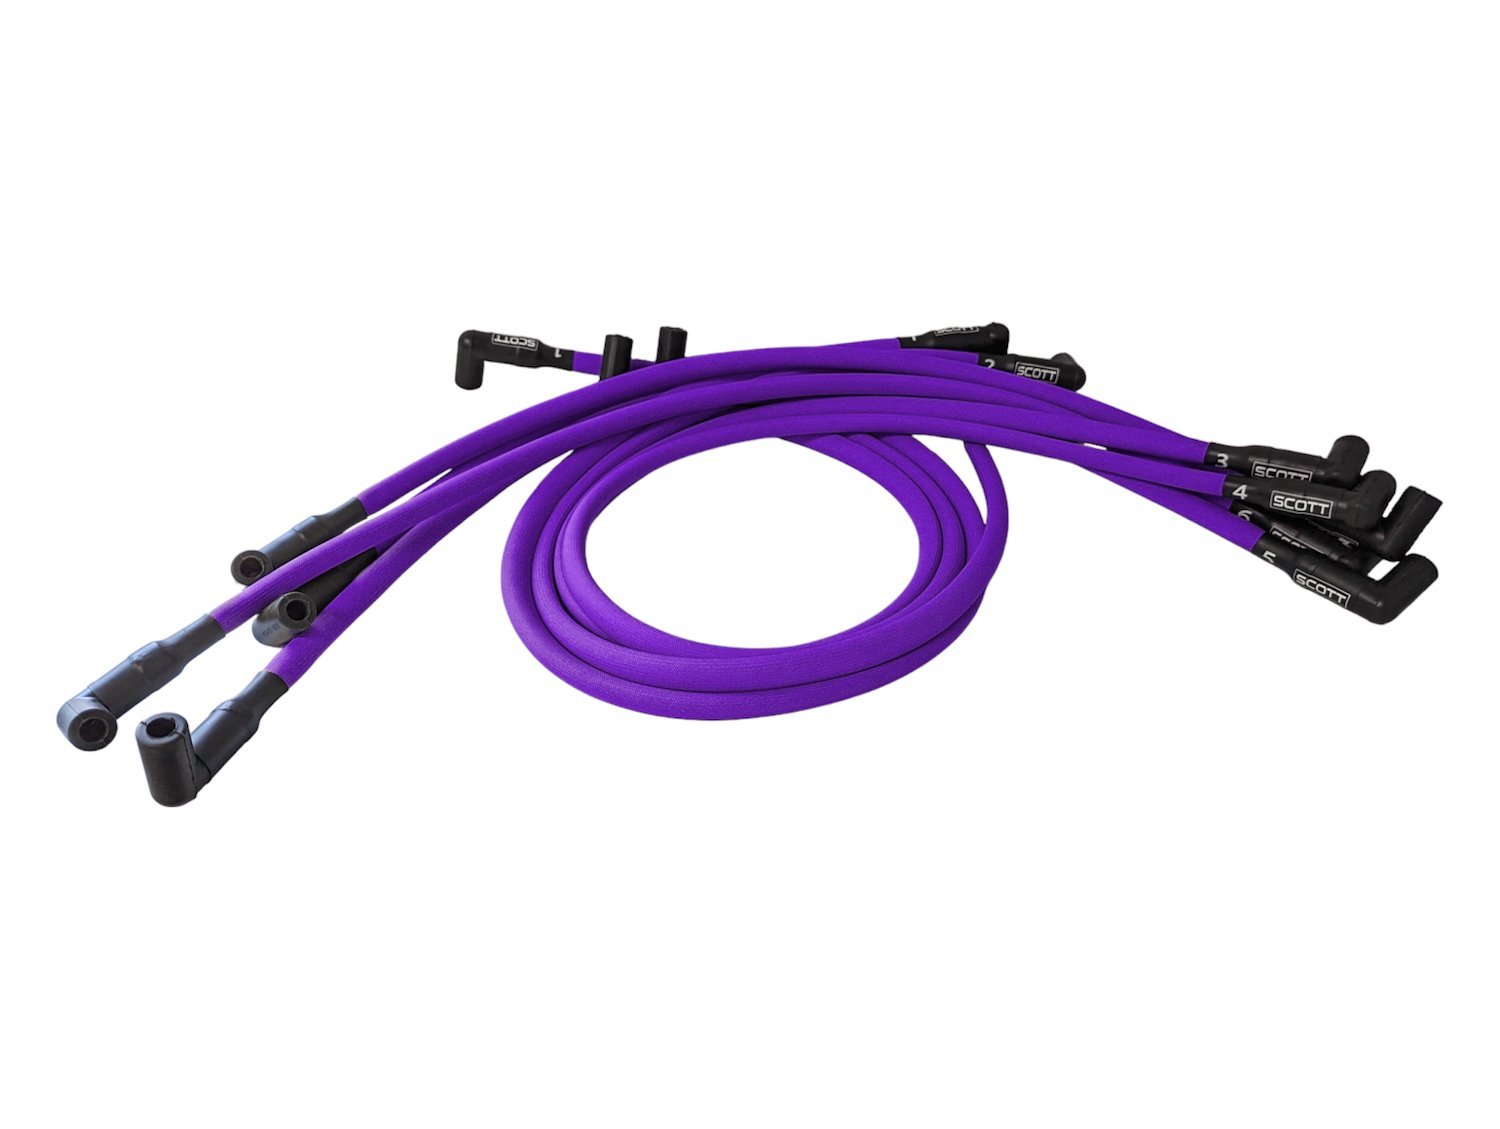 SPW-PS-416-7 High-Performance Fiberglass-Oversleeved Spark Plug Wire Set for Big Block Chevy, Under Header [Purple]